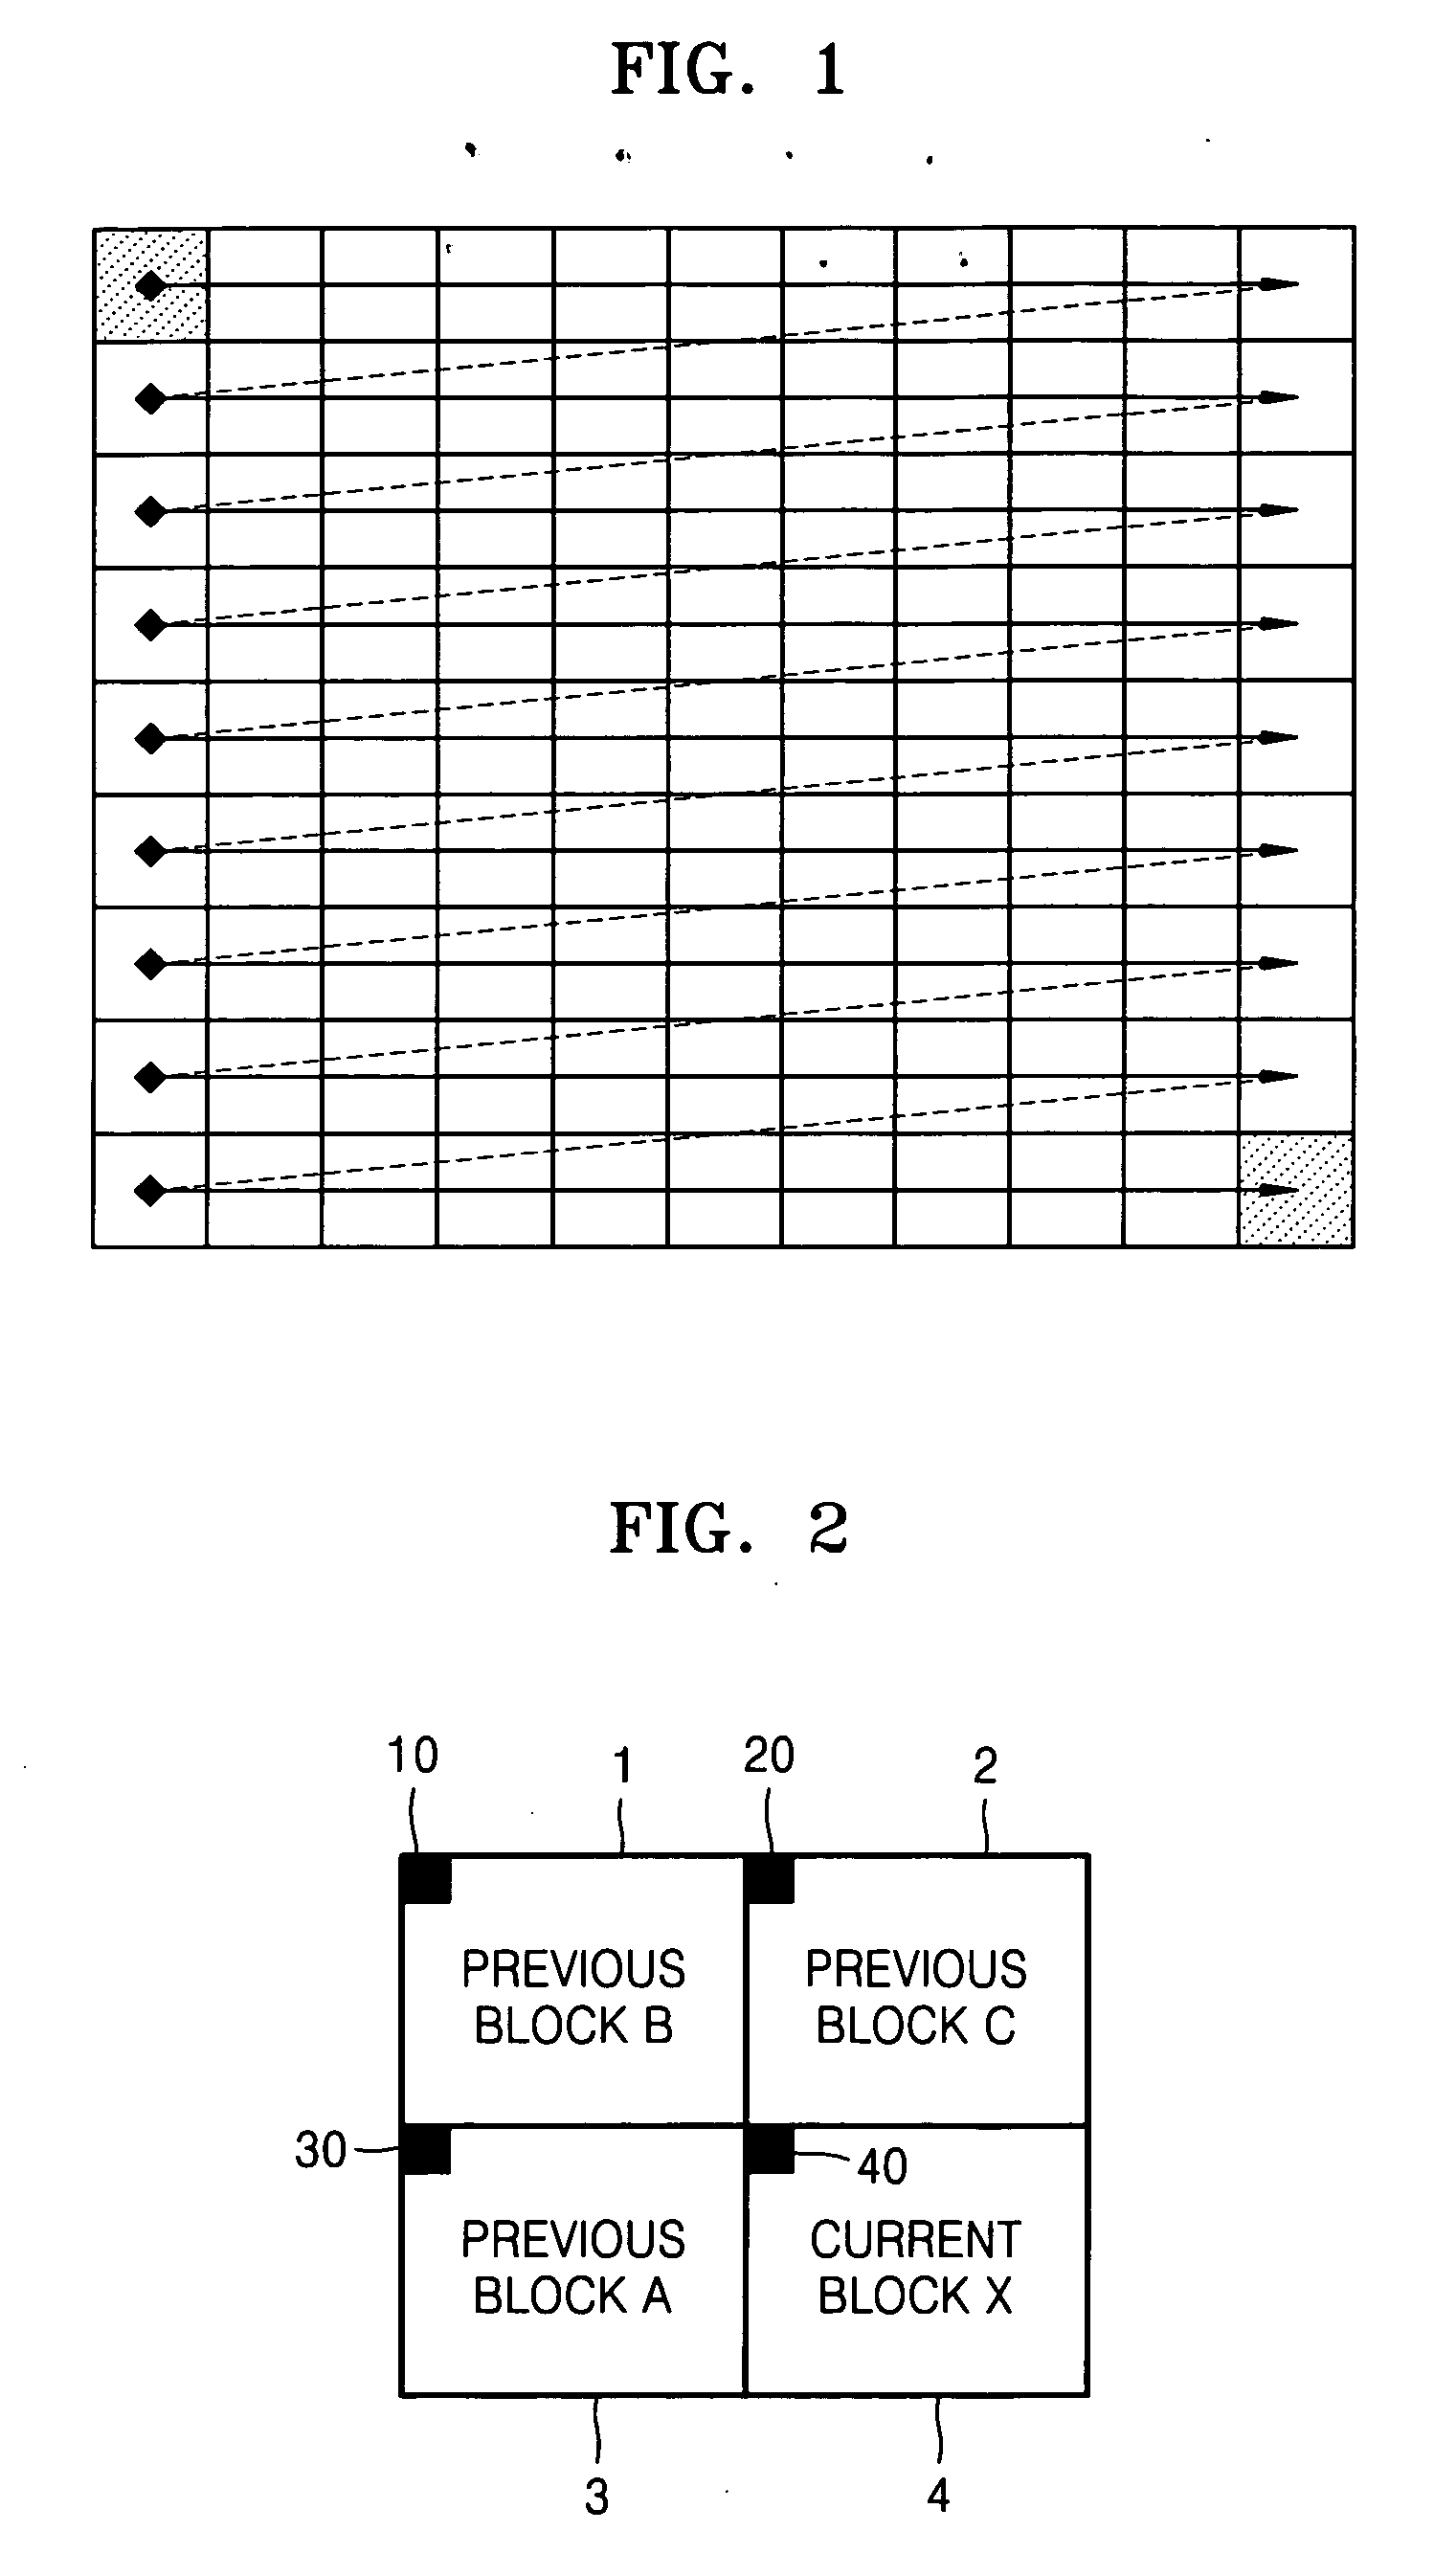 Apparatus and method for predicting coefficients of video block